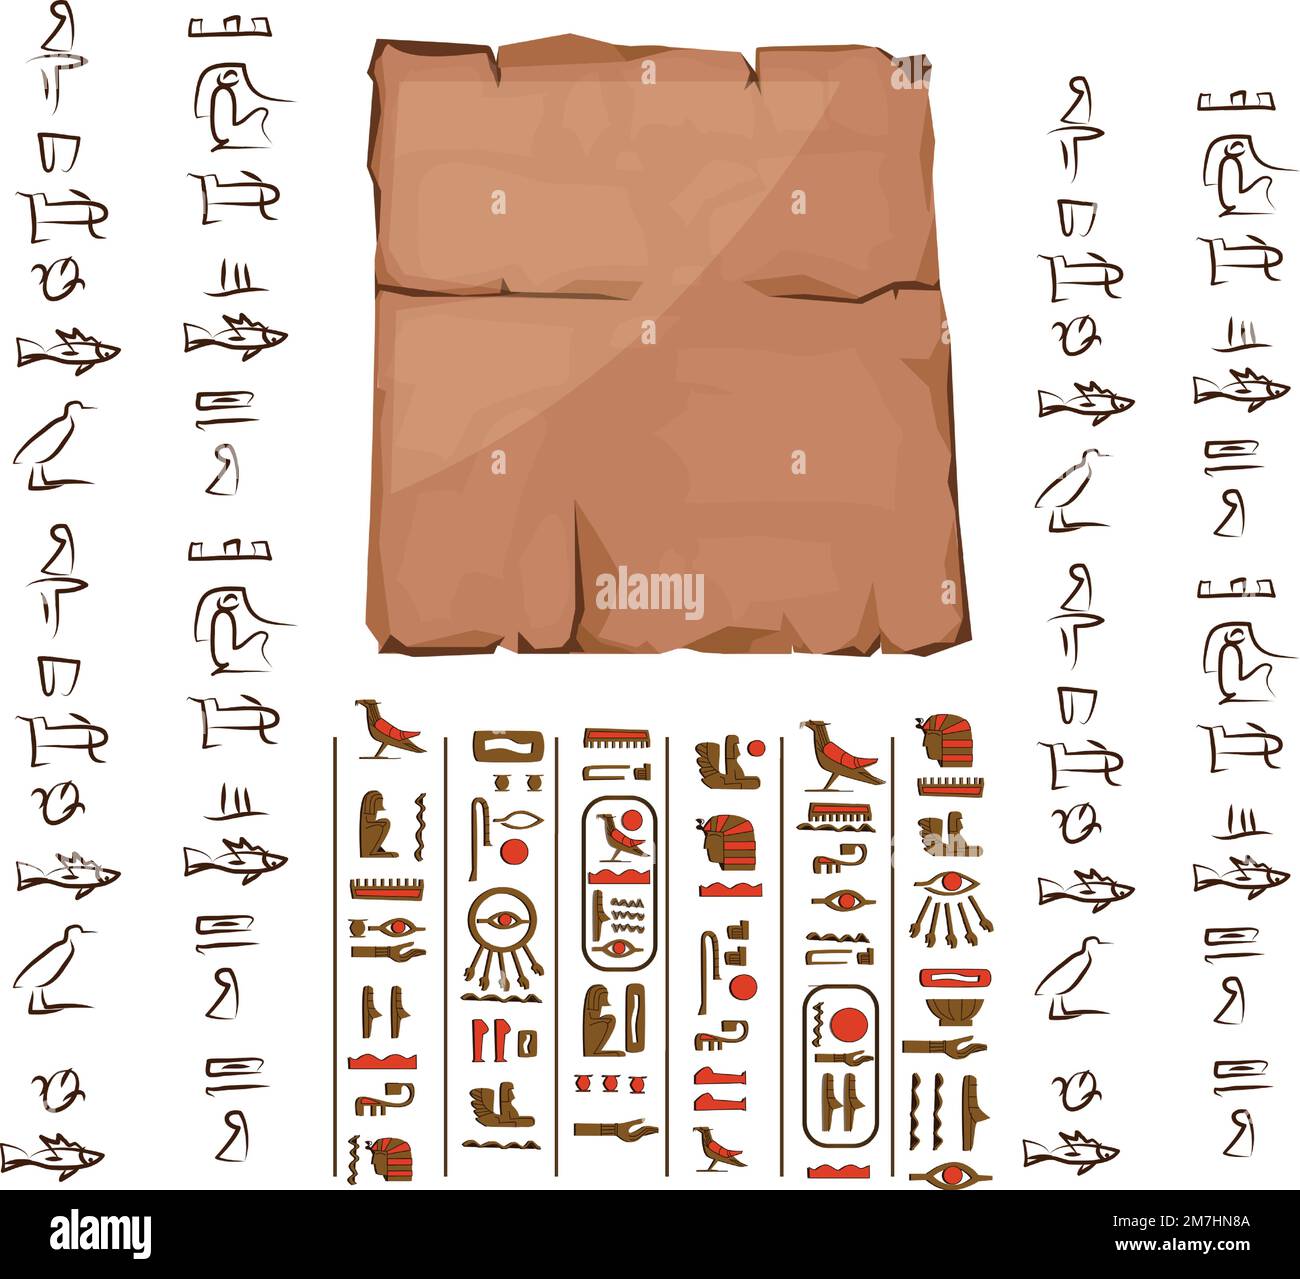 Ancient Egypt papyrus part cartoon vector illustration. Ancient paper with hieroglyphs, Egyptian culture religious symbols, facility for storing information, isolated on white background Stock Vector